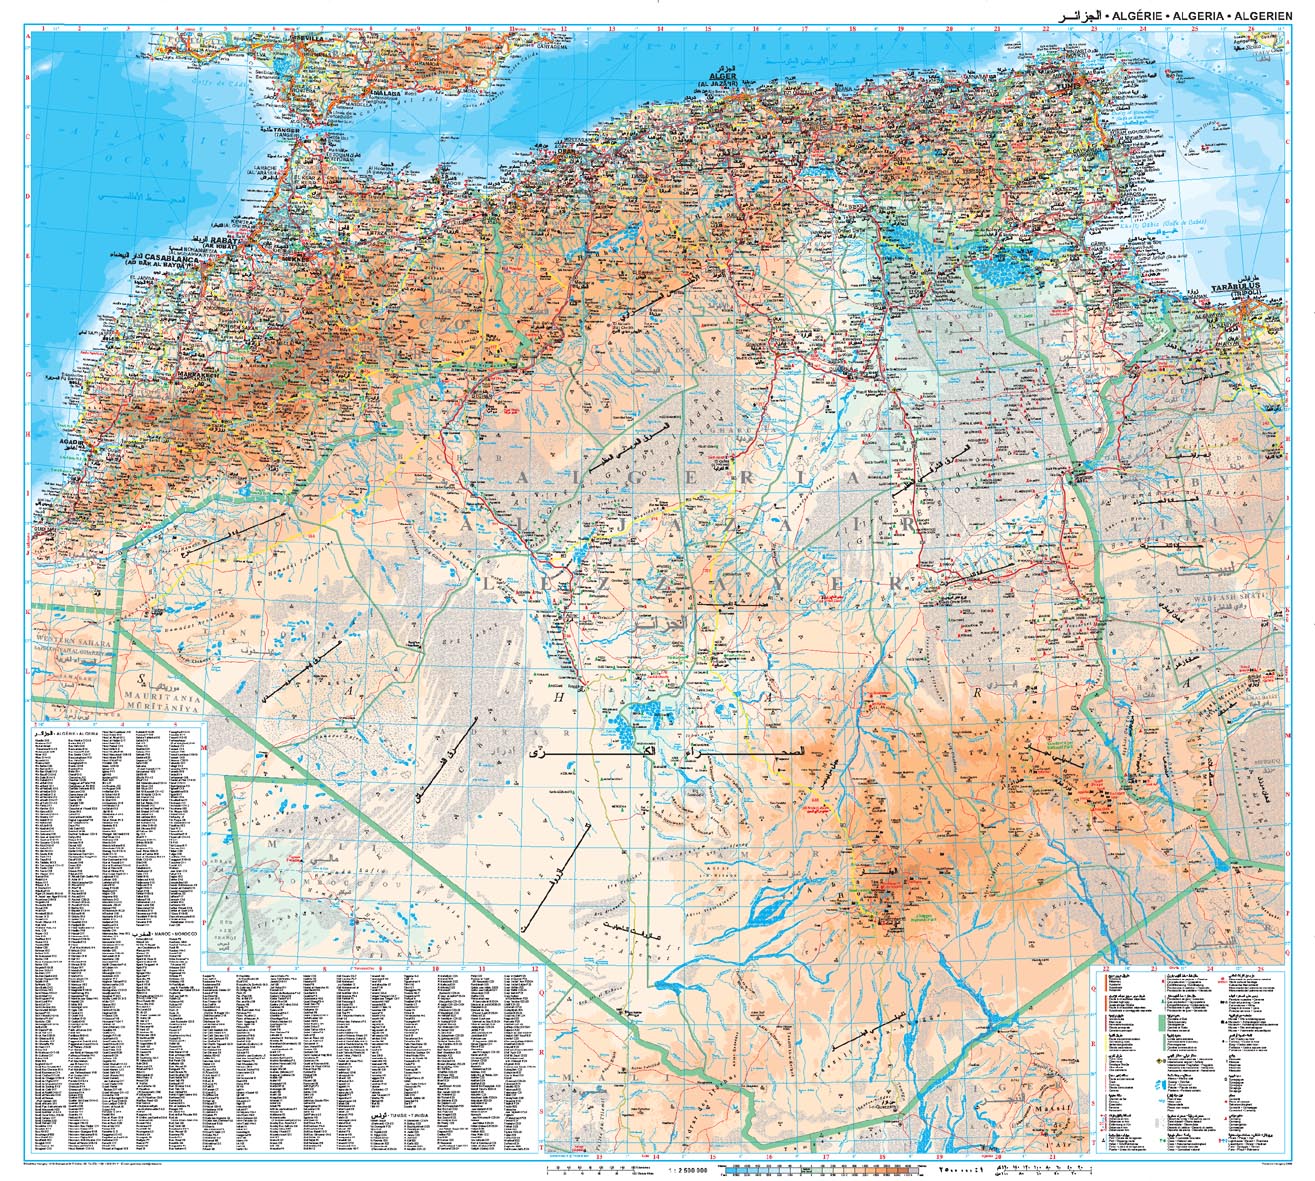 Algeria (geographical) overview map